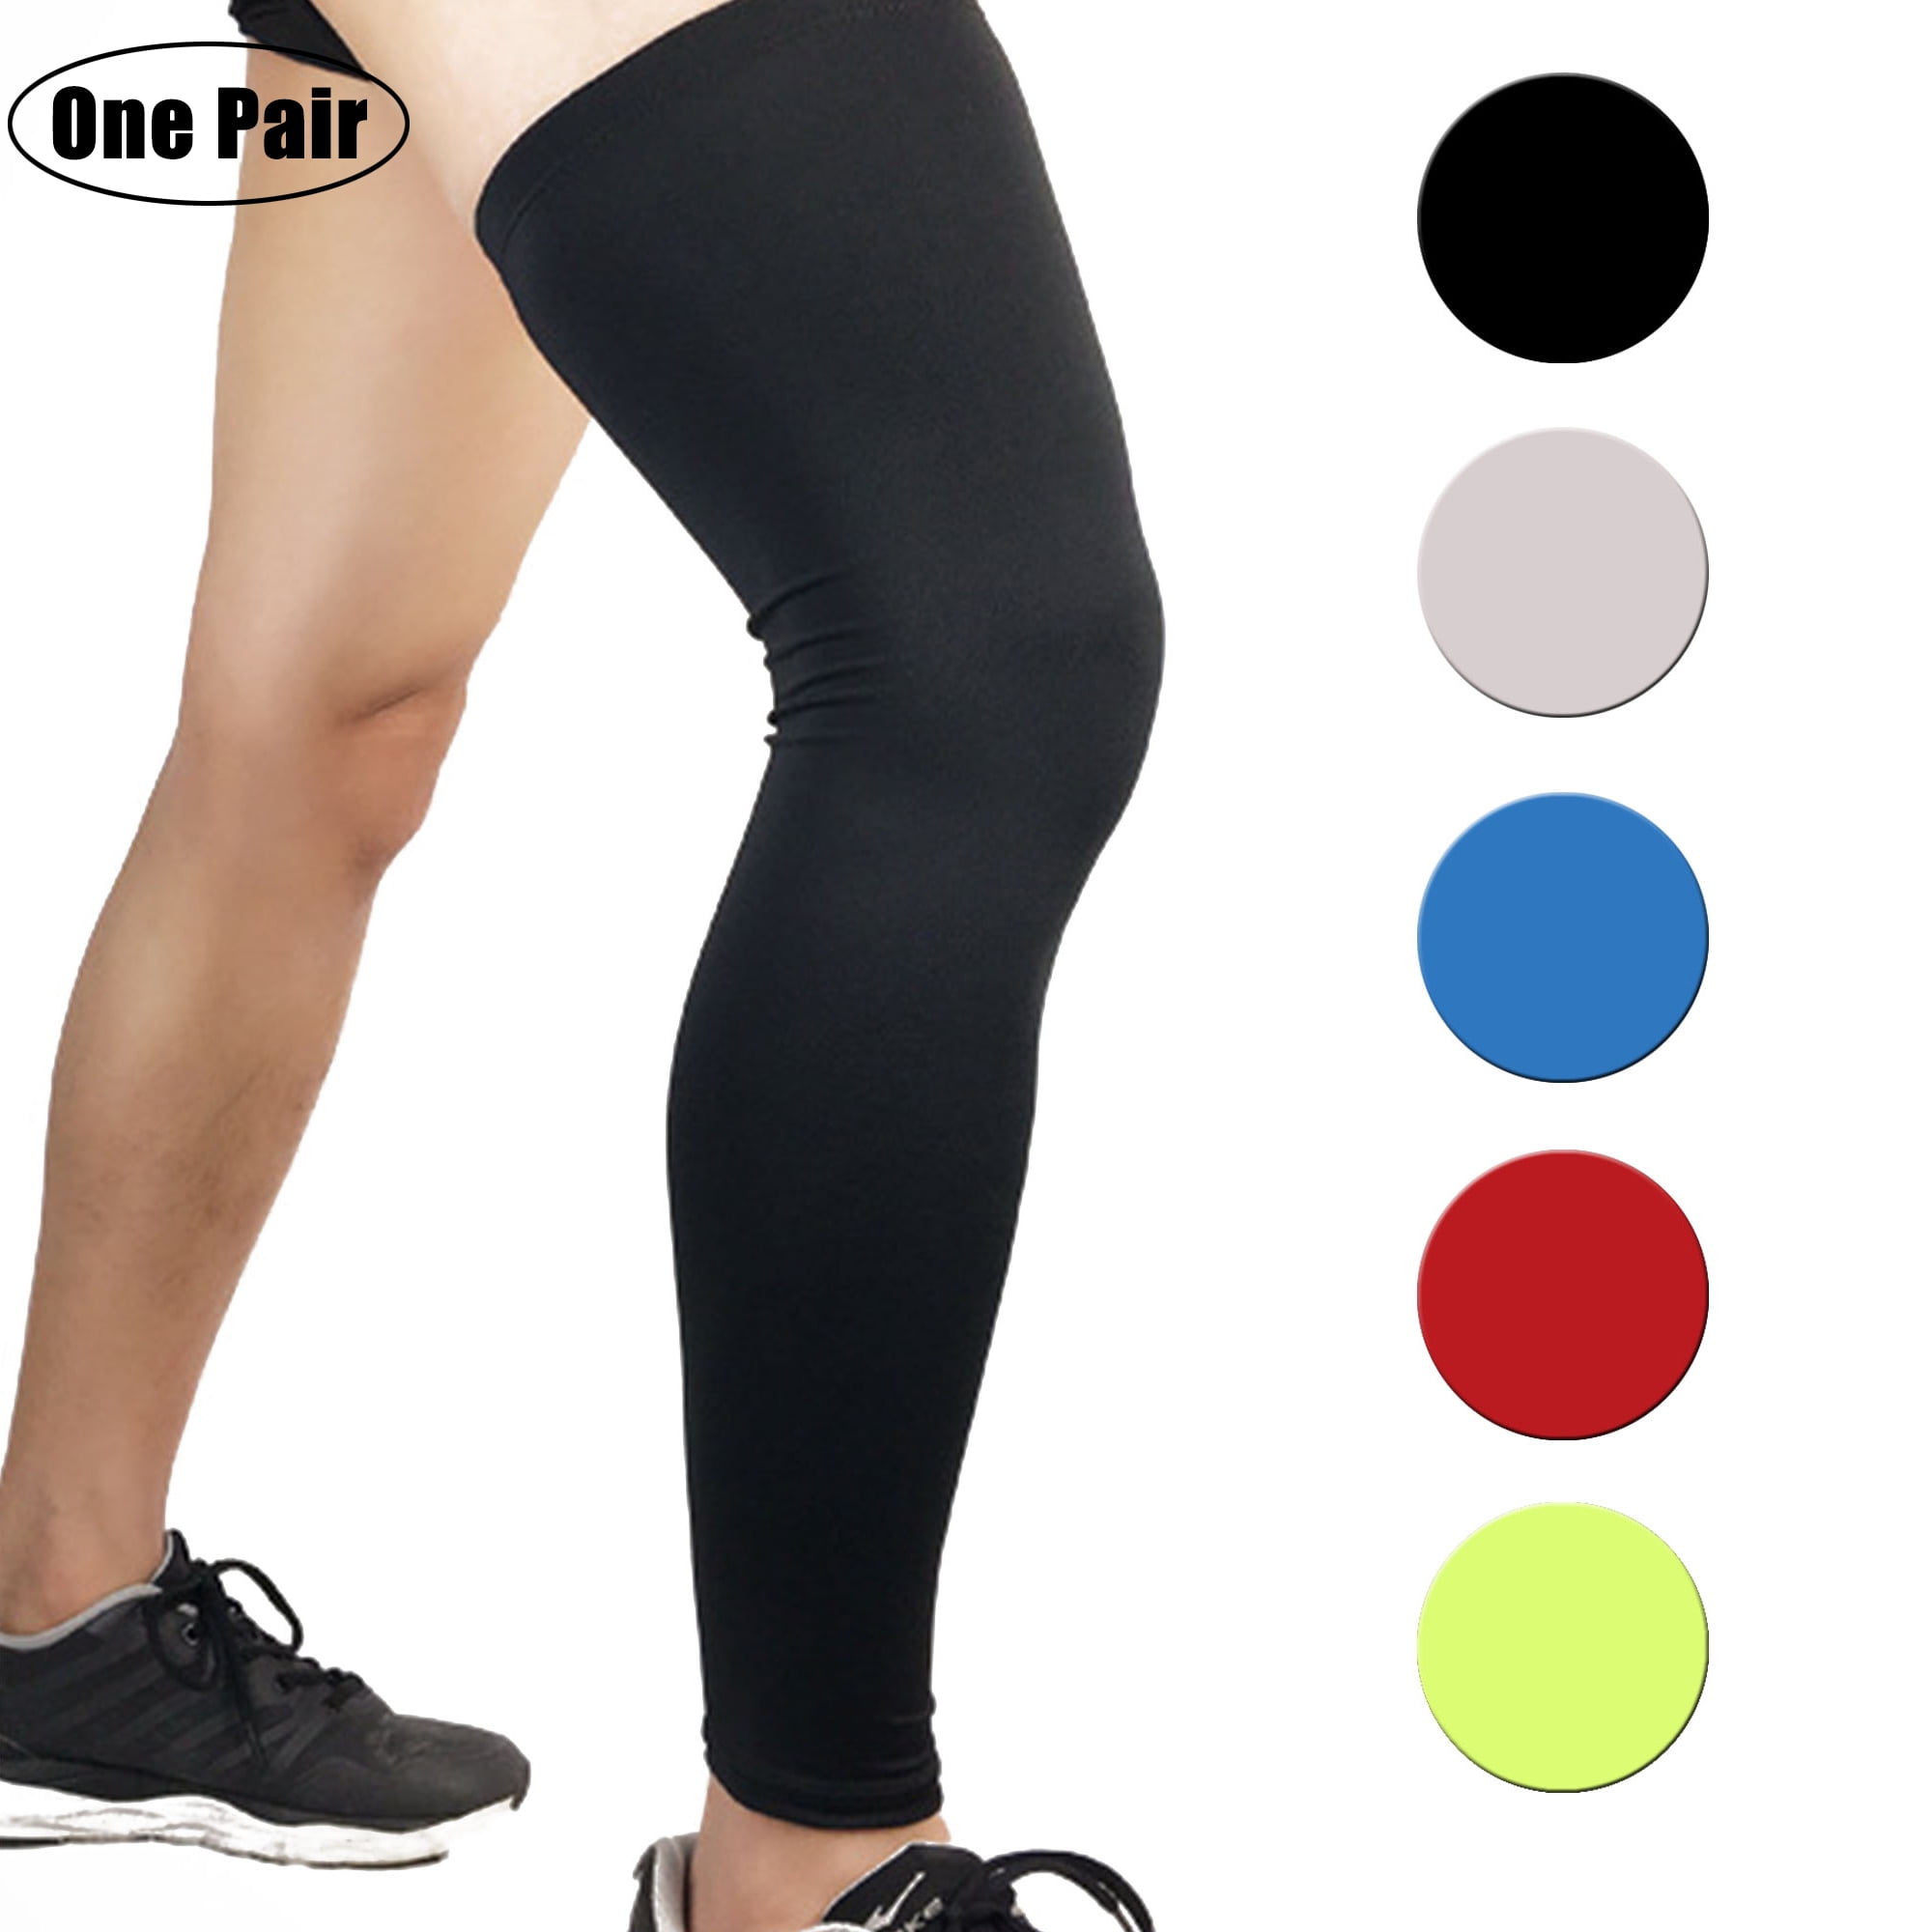 Details about   Pair Compression Calf Sleeves Leg Splints Running Sports Cycling Support Guards 